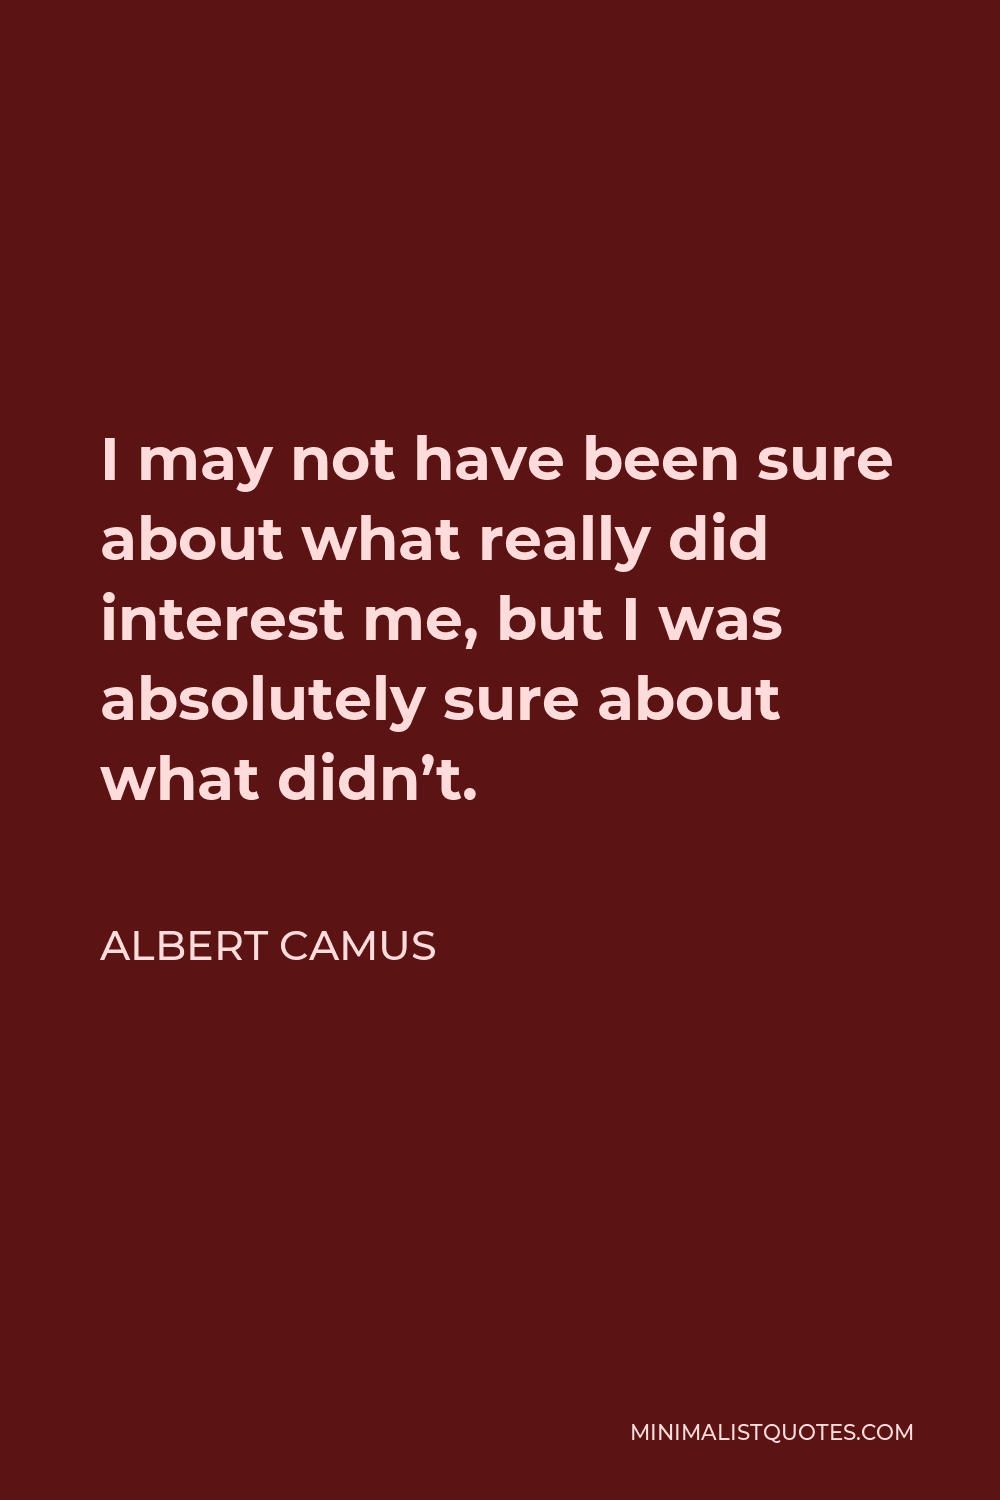 Albert Camus Quote - I may not have been sure about what really did interest me, but I was absolutely sure about what didn’t.